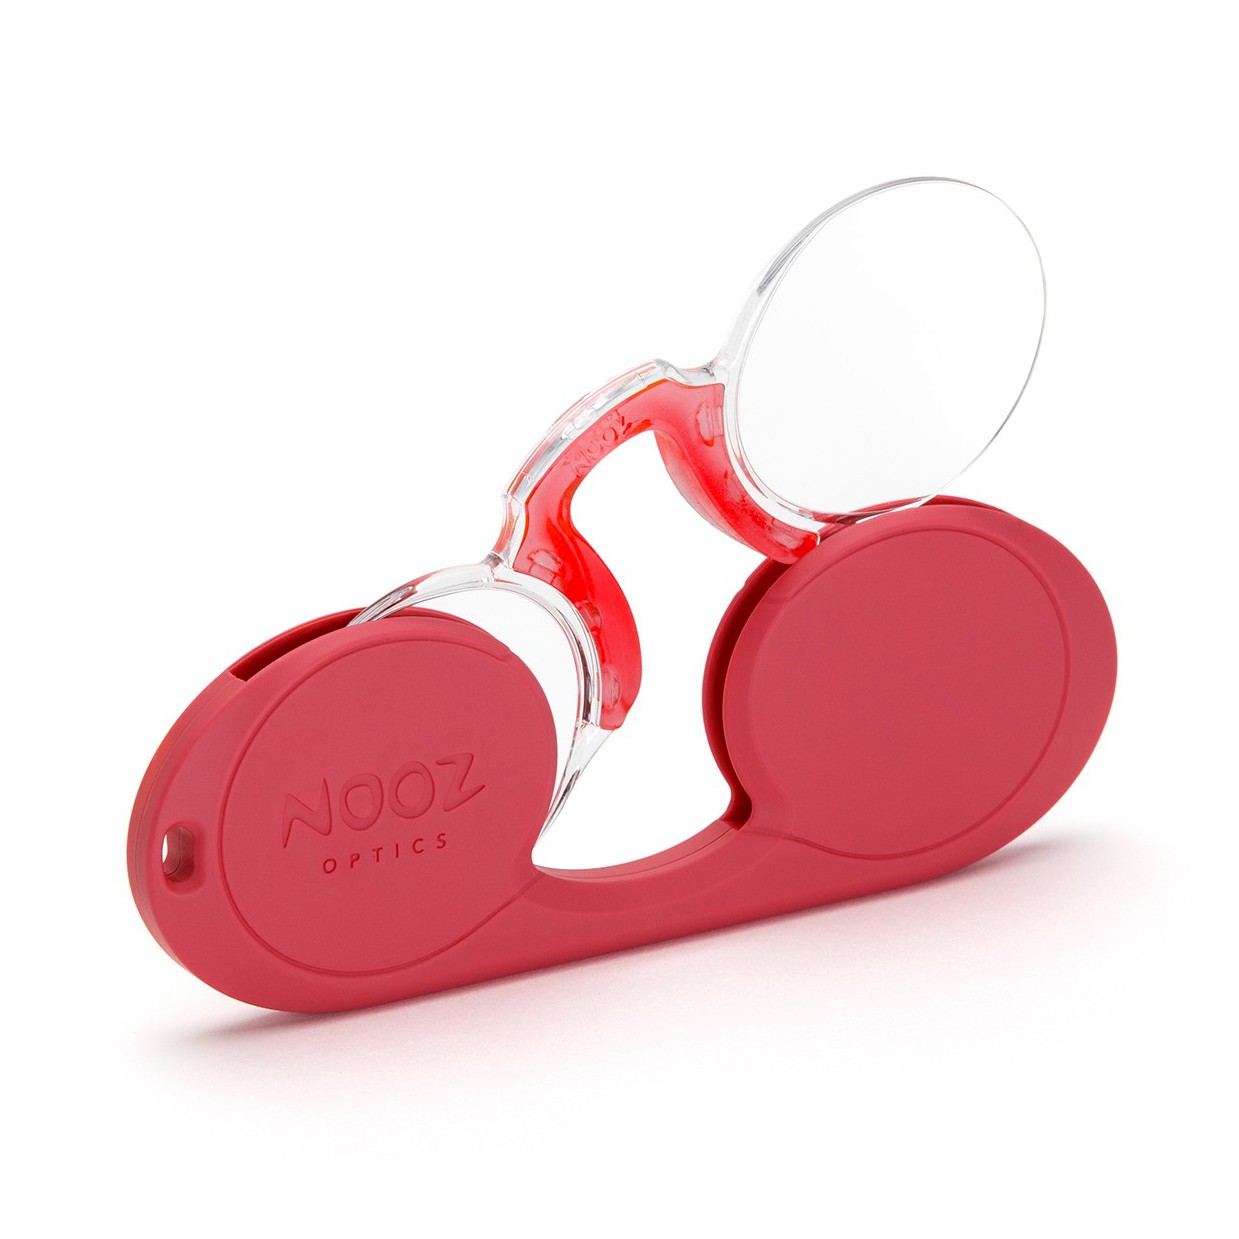 An image of Nooz Optics Oval Reading Glasses - Tomato Red +1